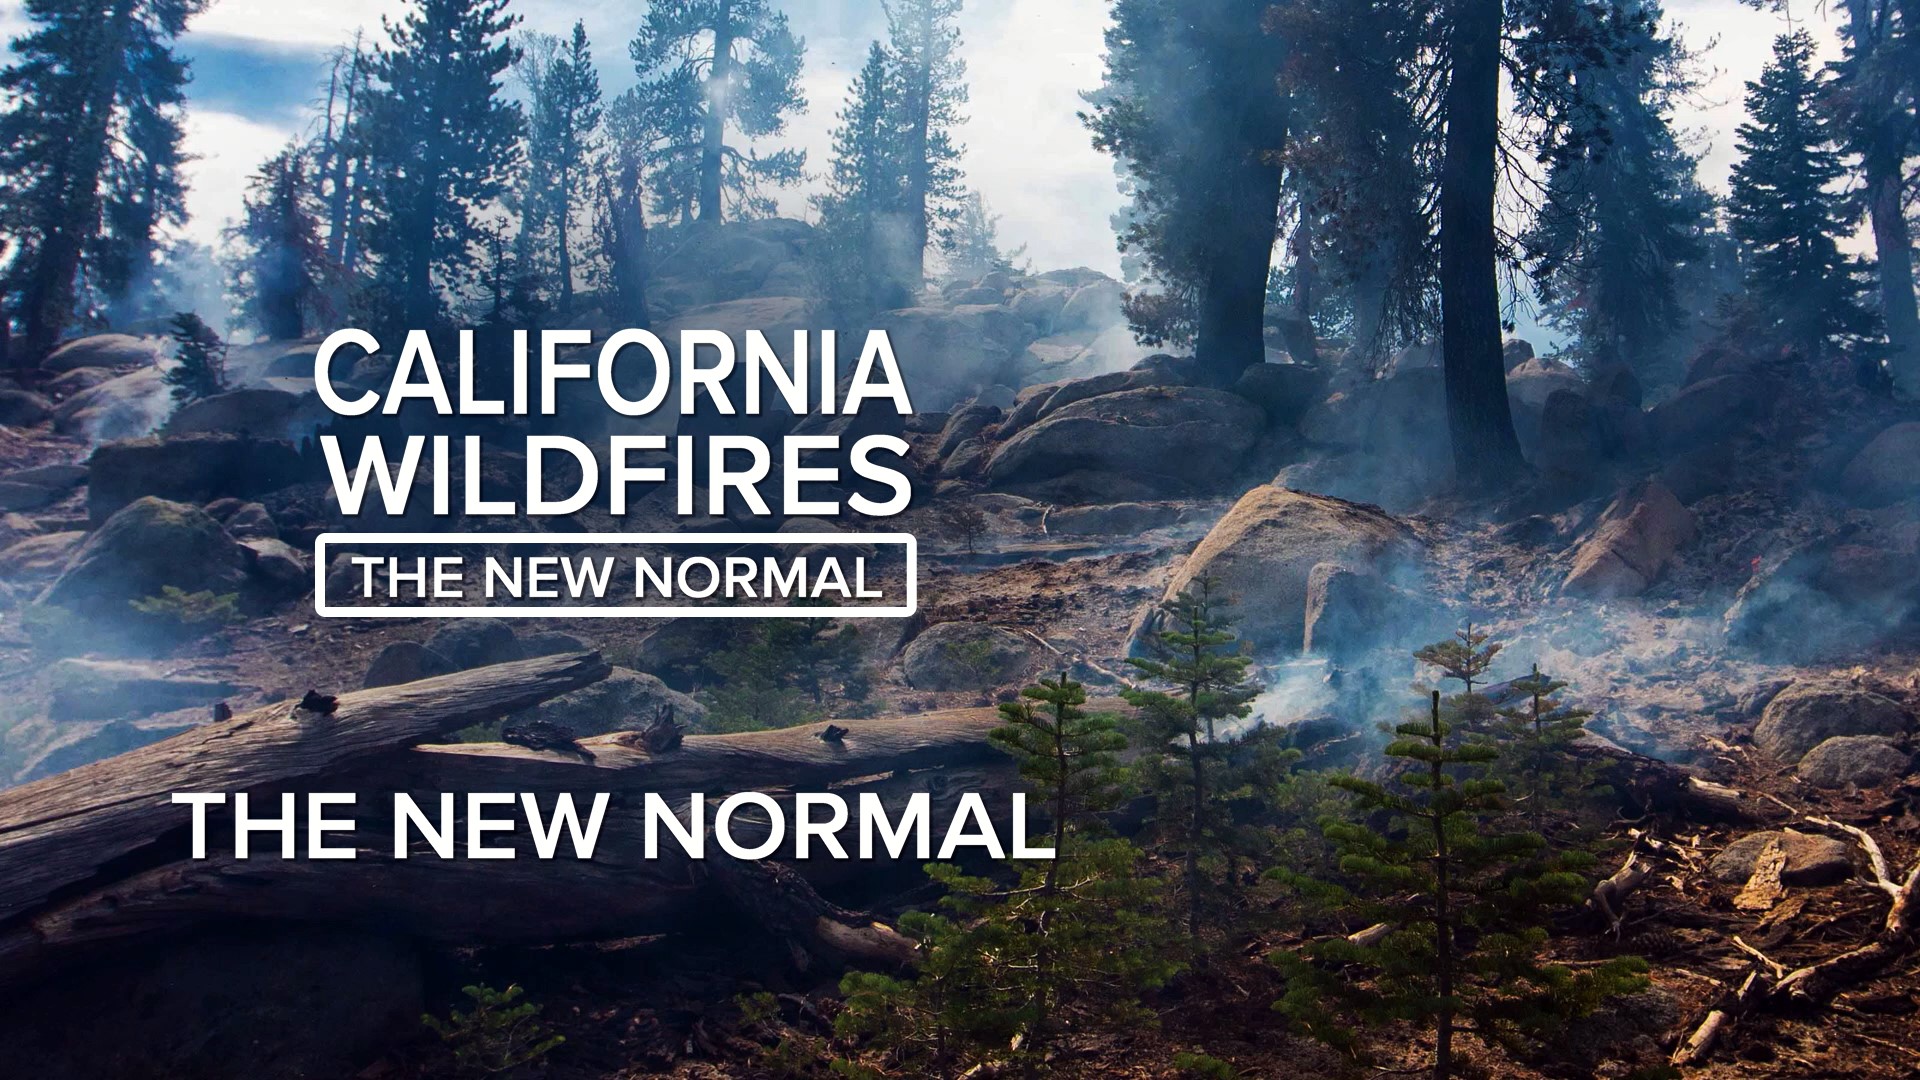 California's leaders tell us we've entered a "new normal" of more intense wildfires. The truth is: Experts think the deadly megafires we've seen are just a preview of the new normal.